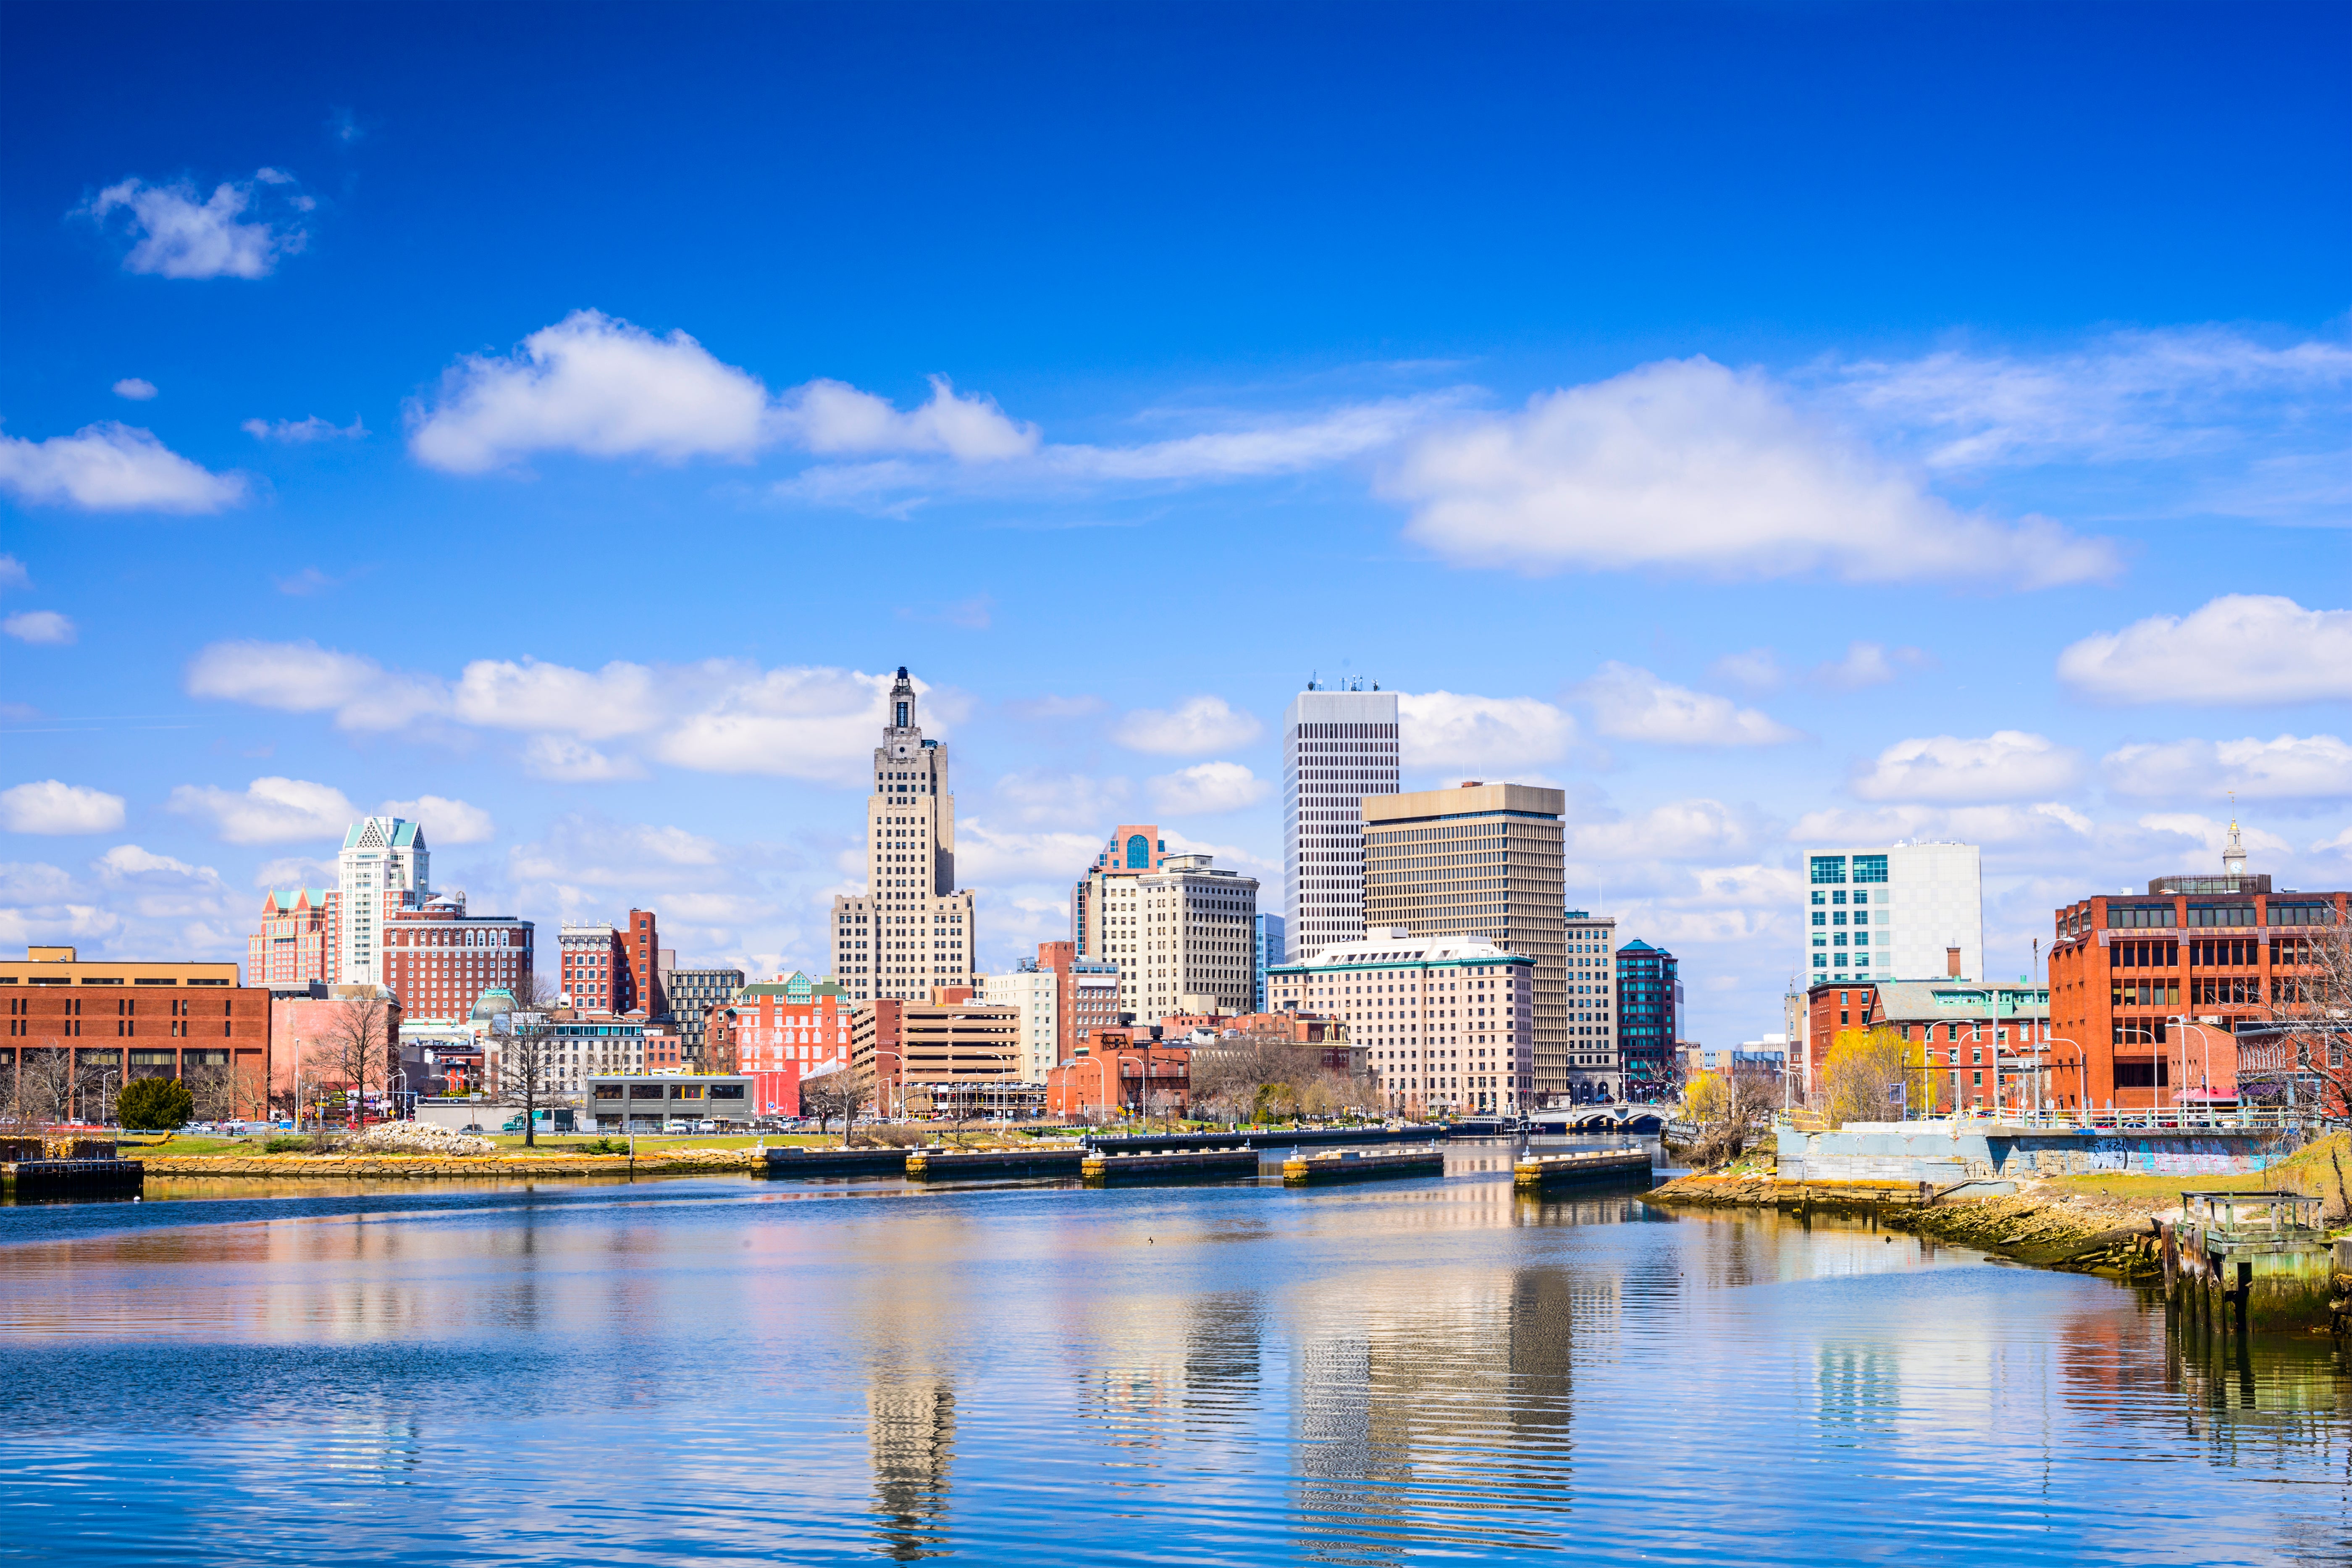 Did You Know That Providence Rhode Island Is Full of Black History & Culture?